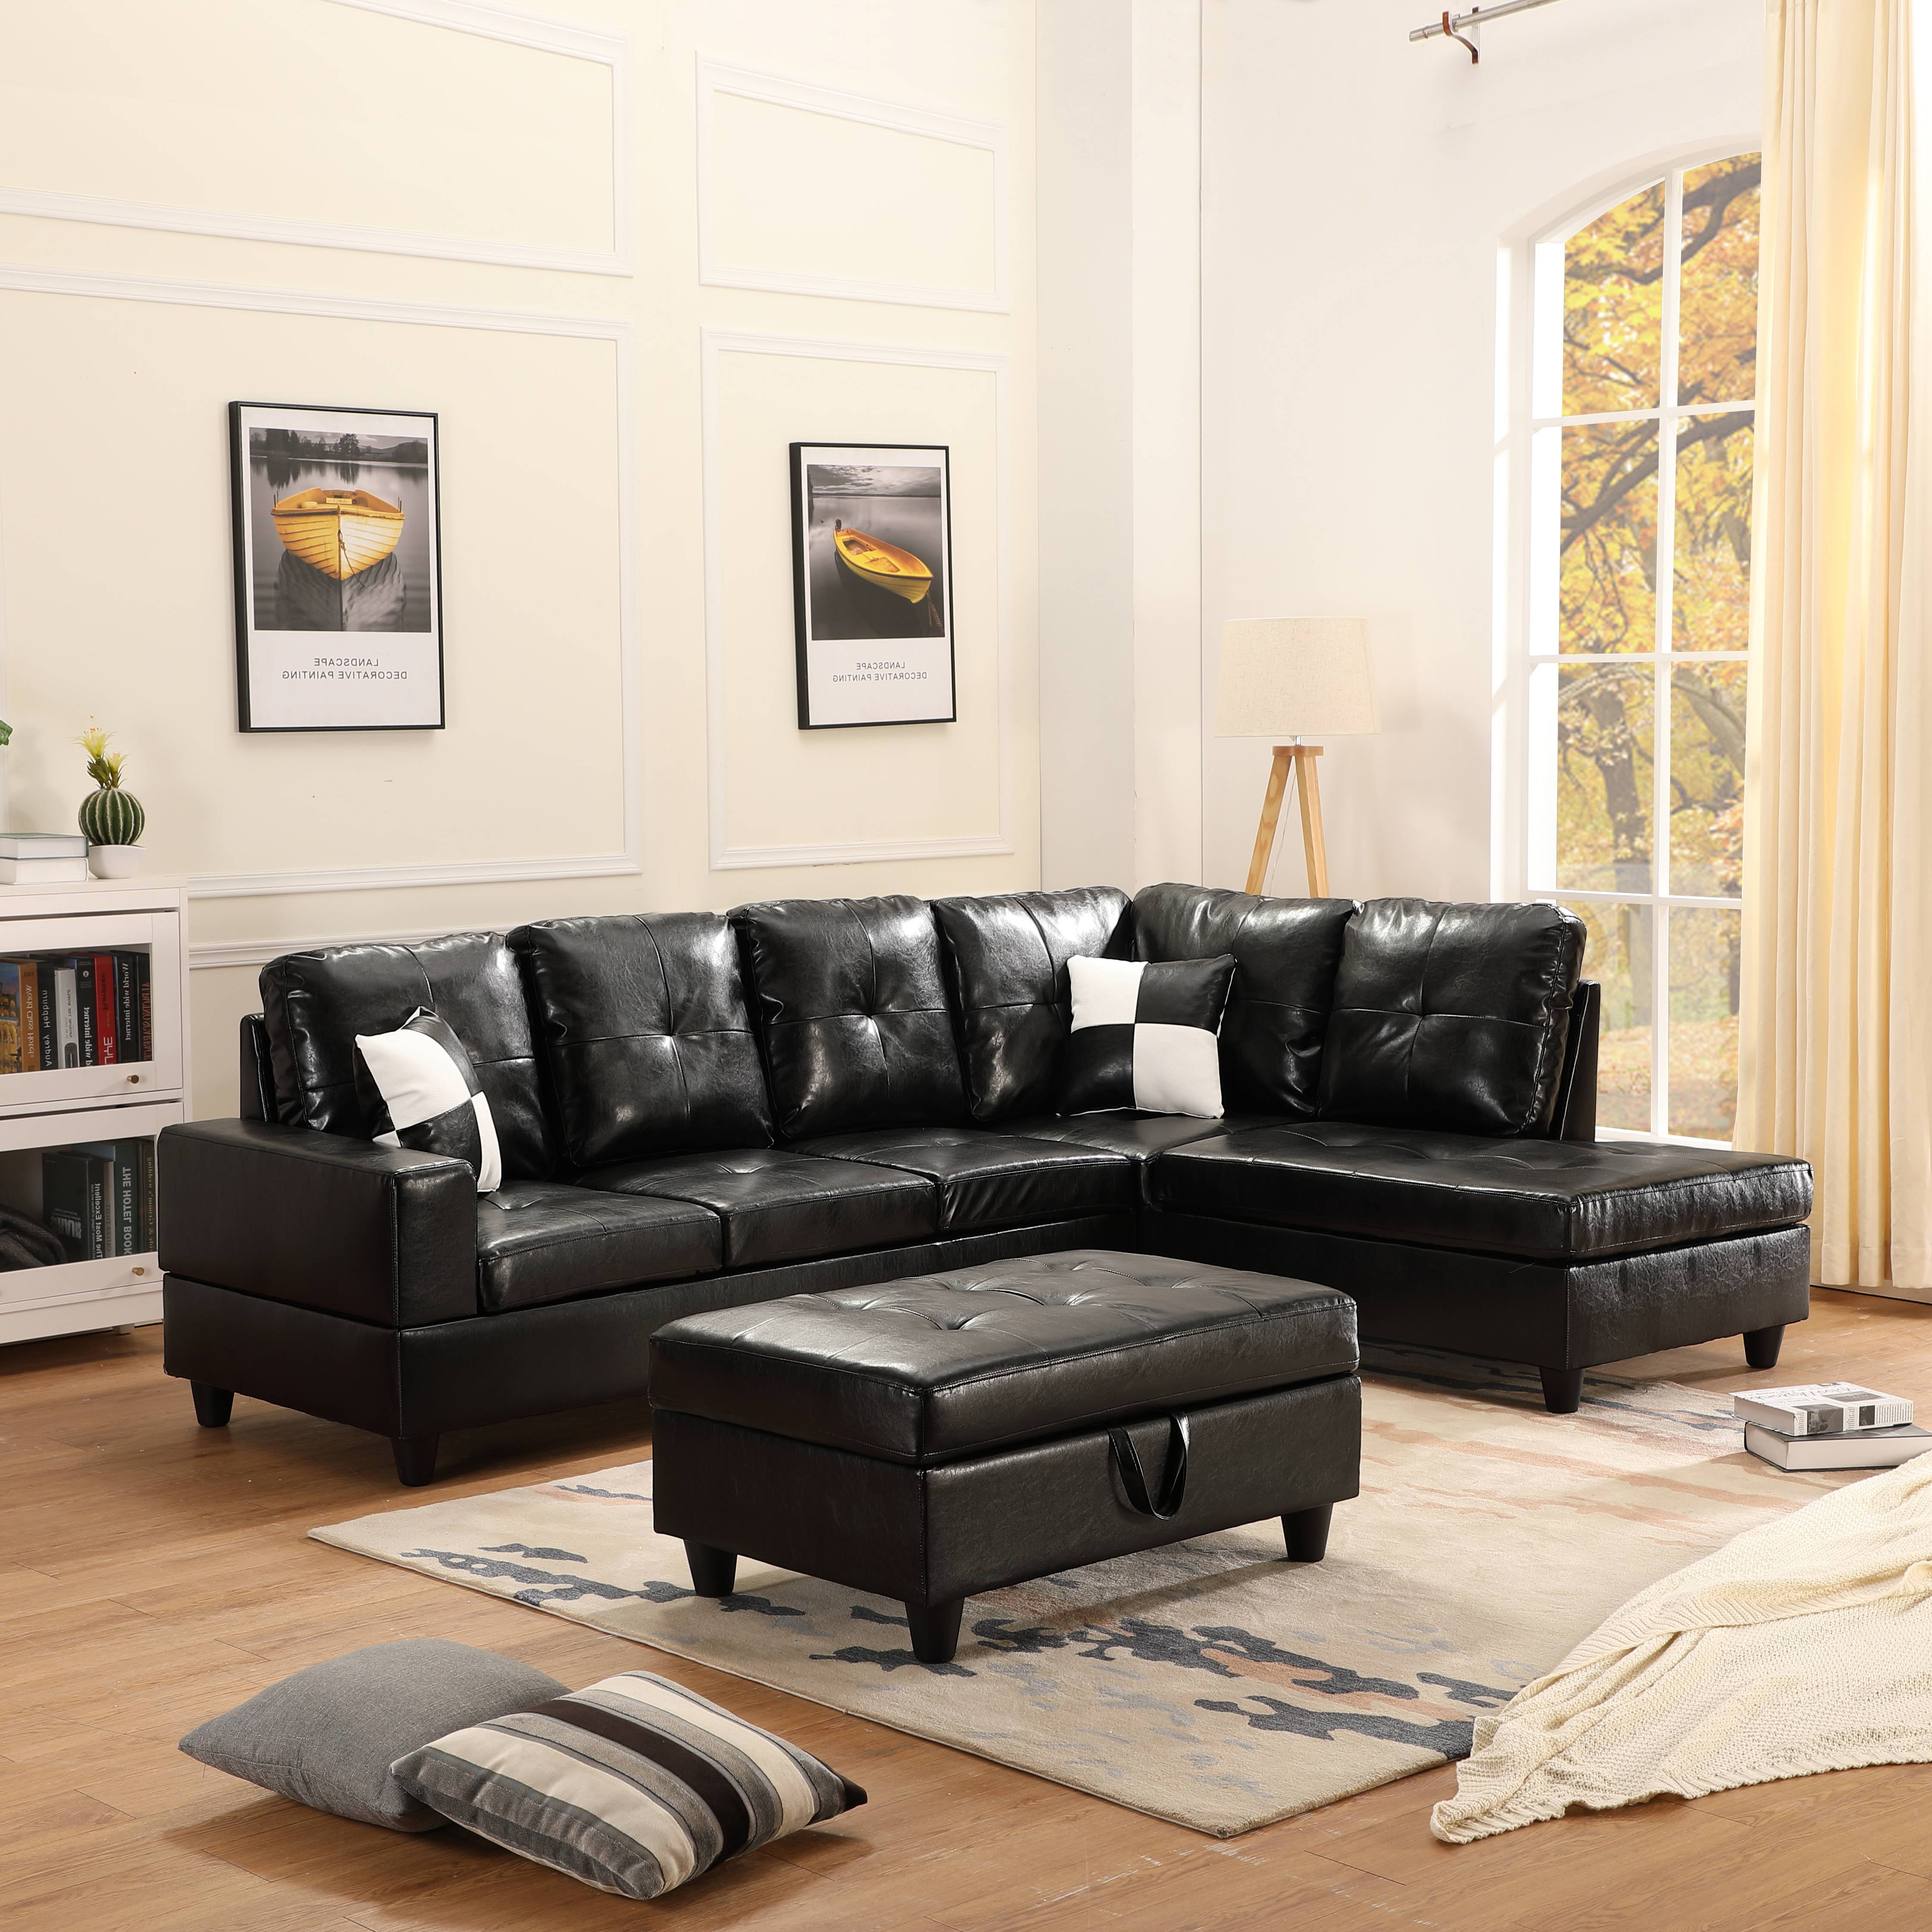 Sectional Sofa Set For Living Room Mid, Leather And Fabric Sectional Sofa